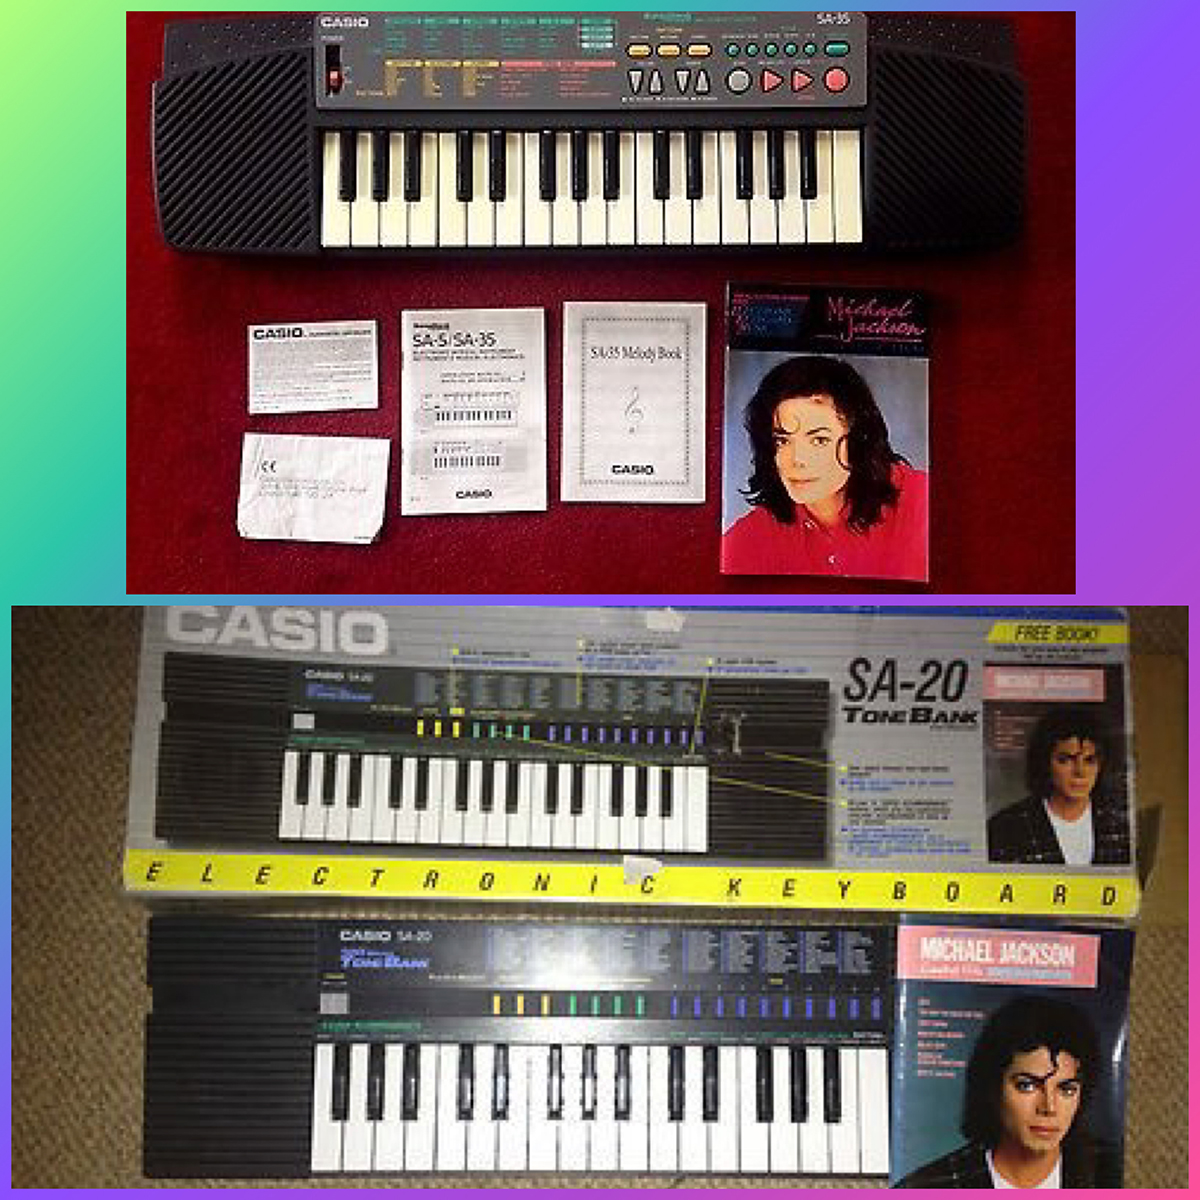 Casio Teamed With MJ To Promote Portable Keyboards